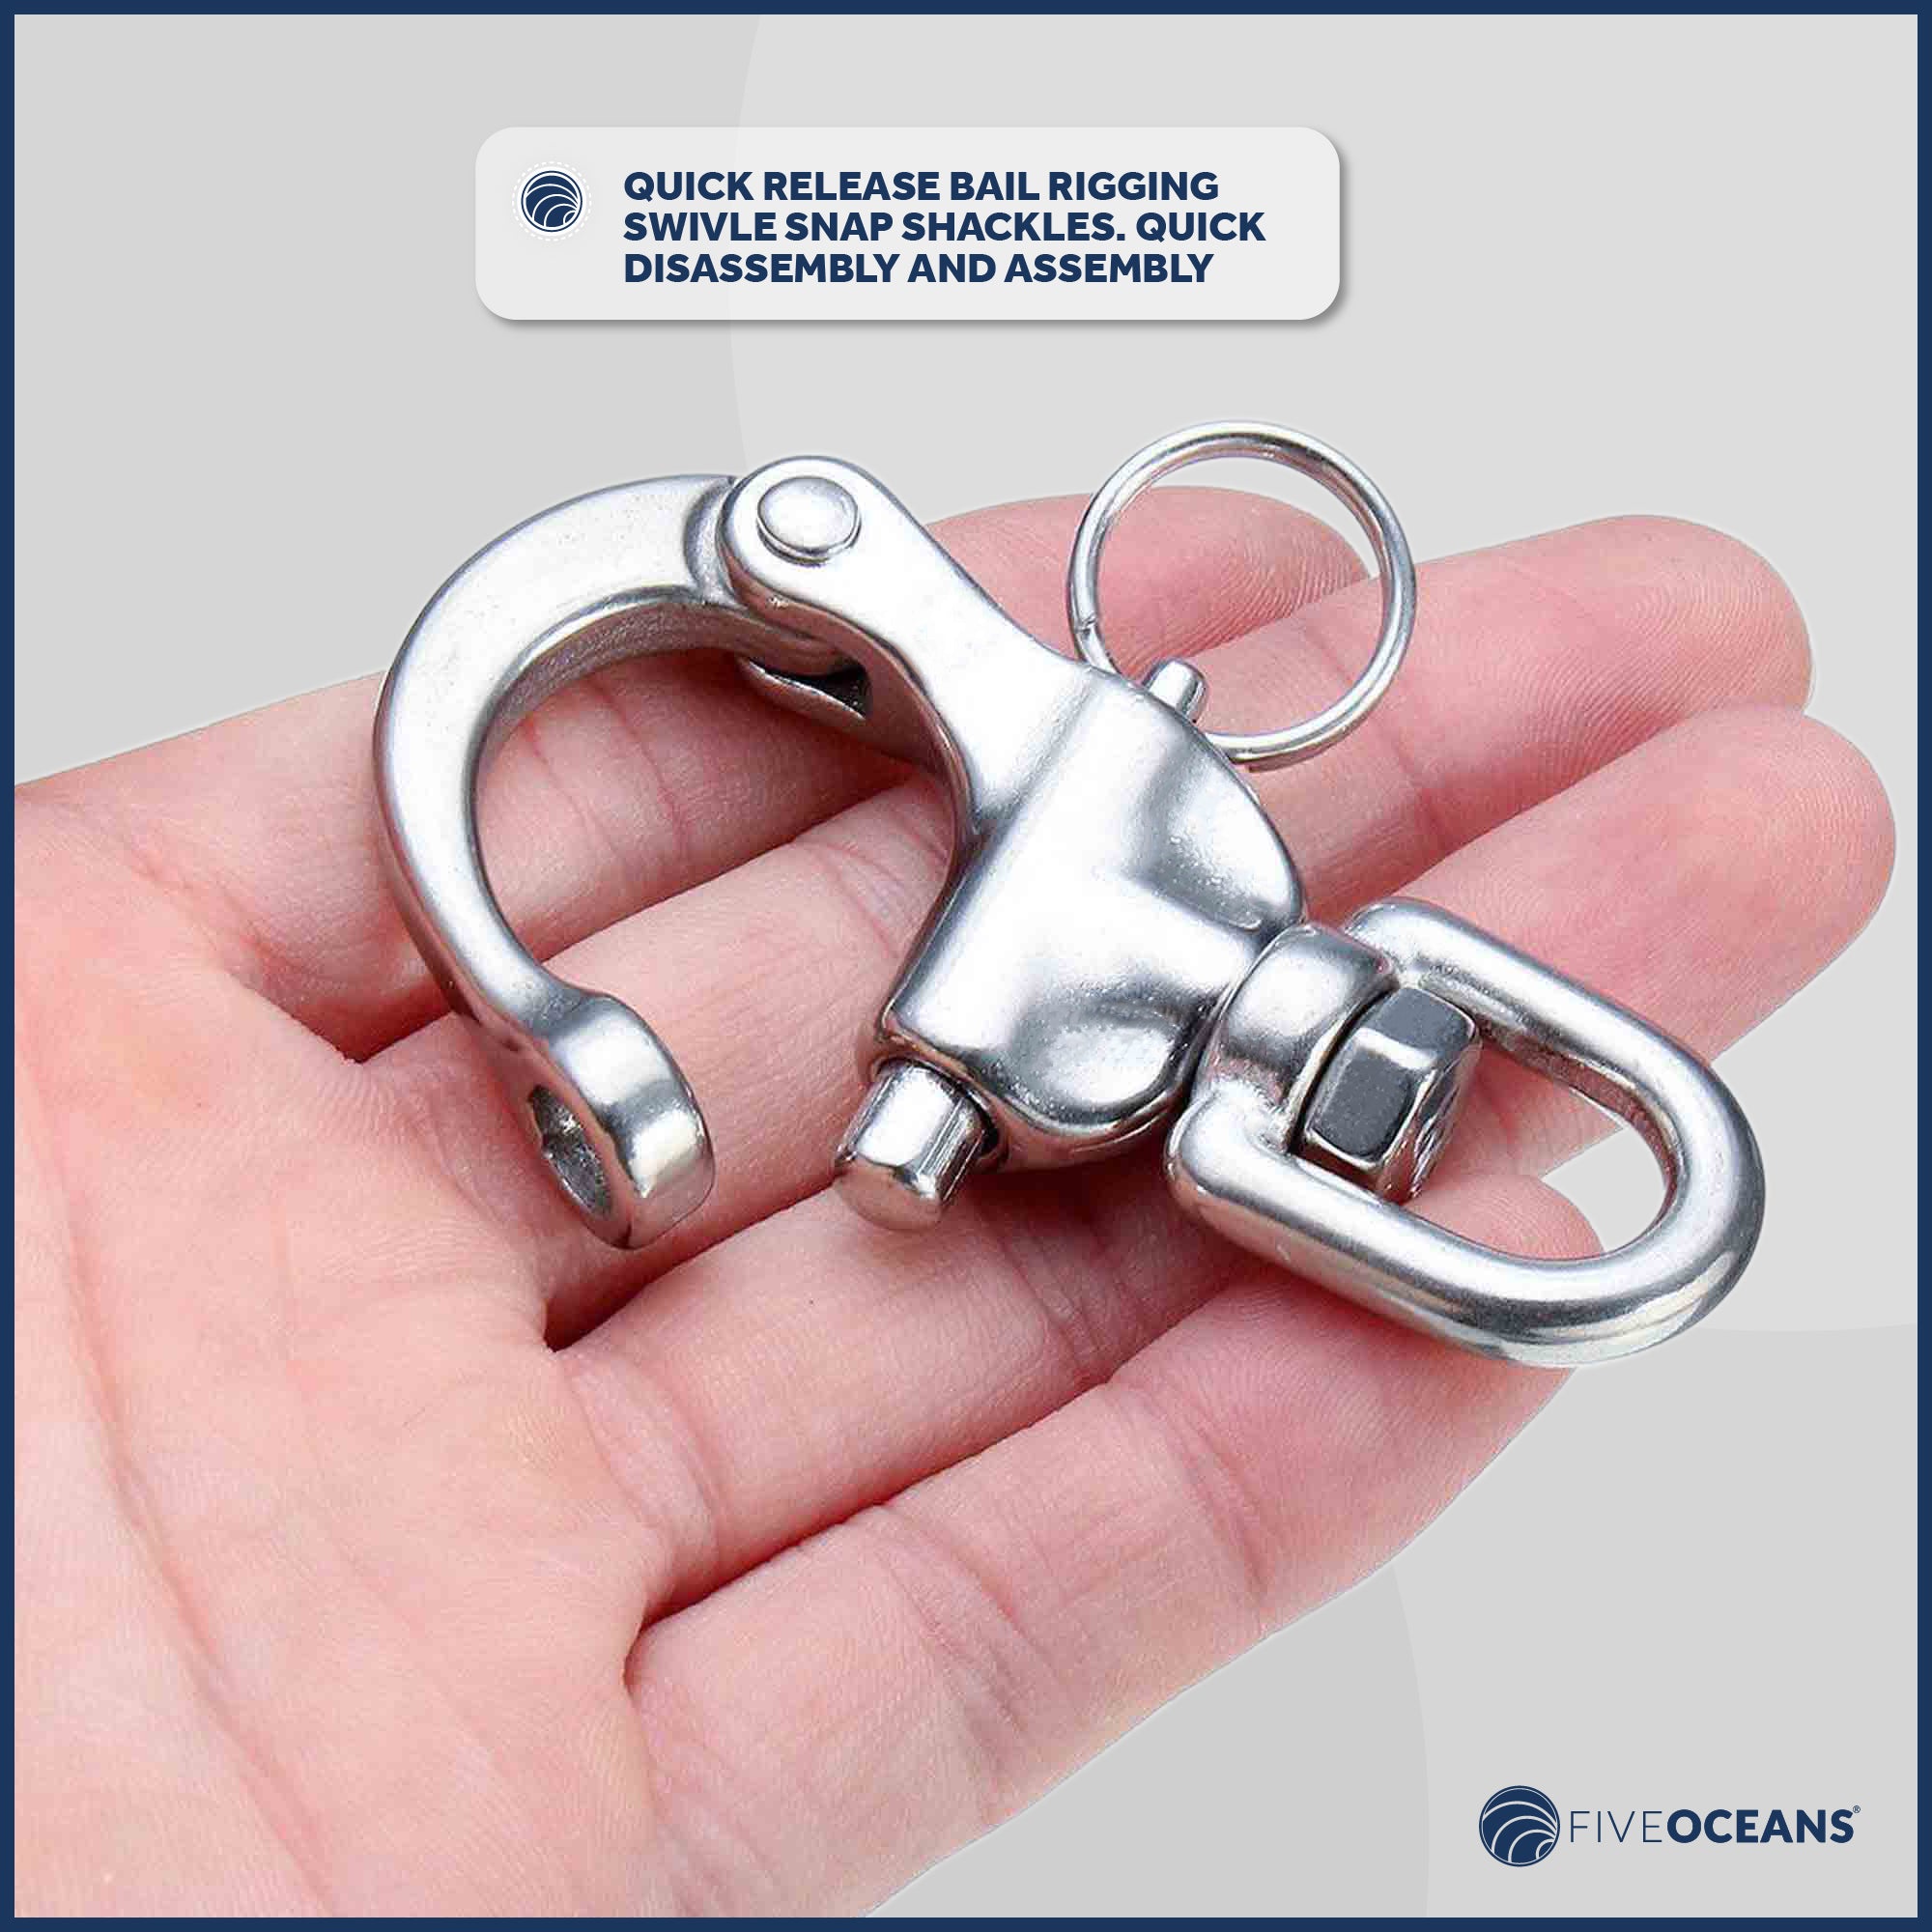 Swivel Eye Snap Shackle Quick Release Bail Rigging, 2 3/4" Stainless Steel - FO443